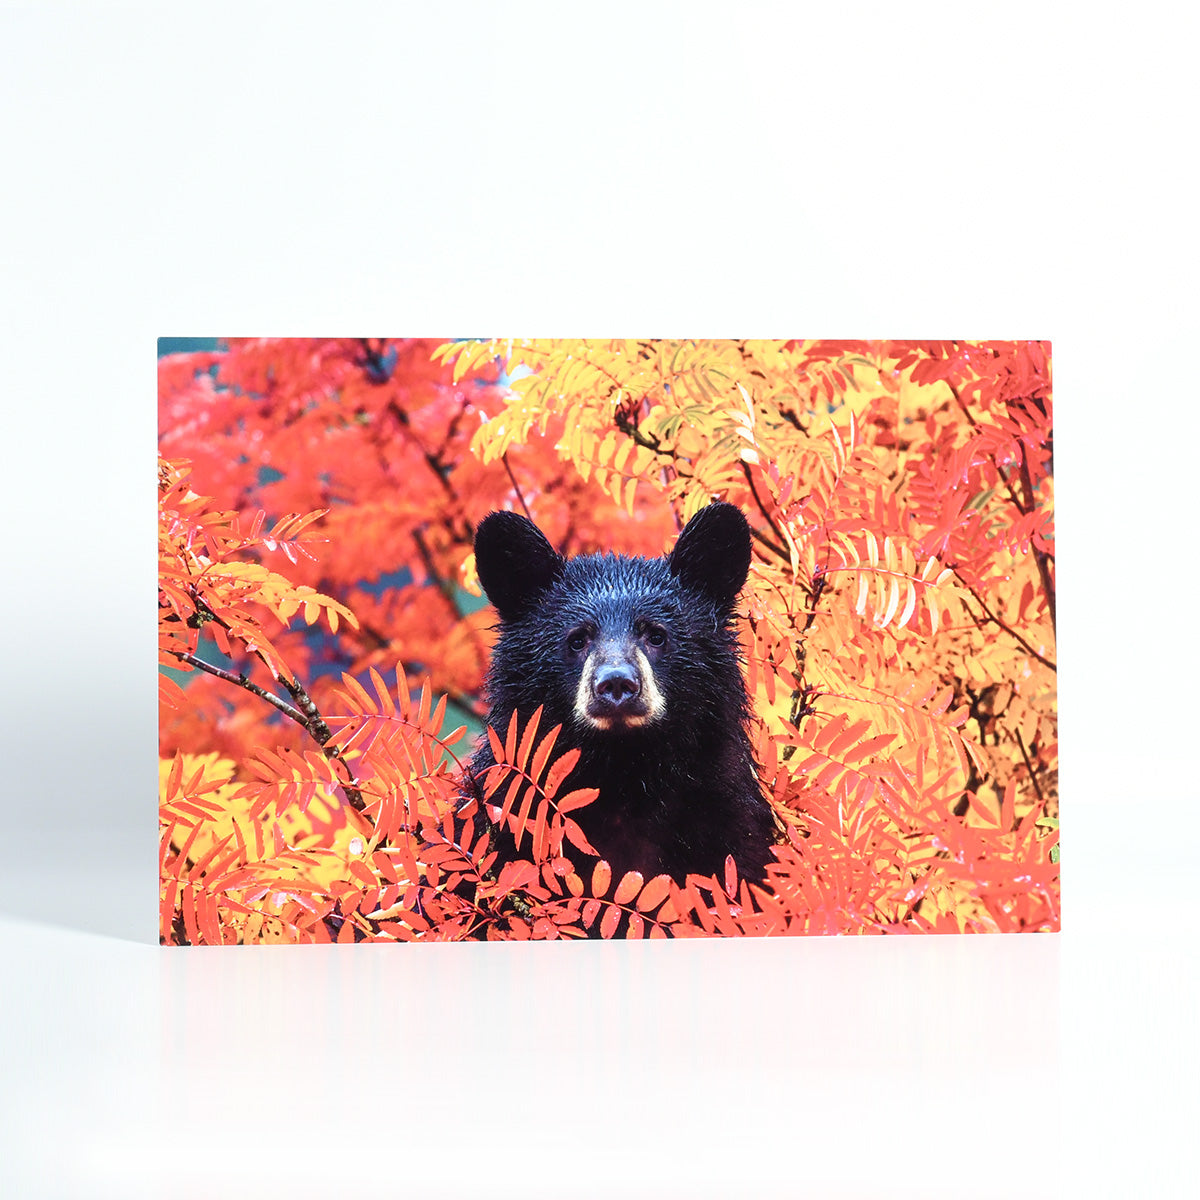 Stunning Photo of a Bear Cub in Autumn Leaves Printed on Metal